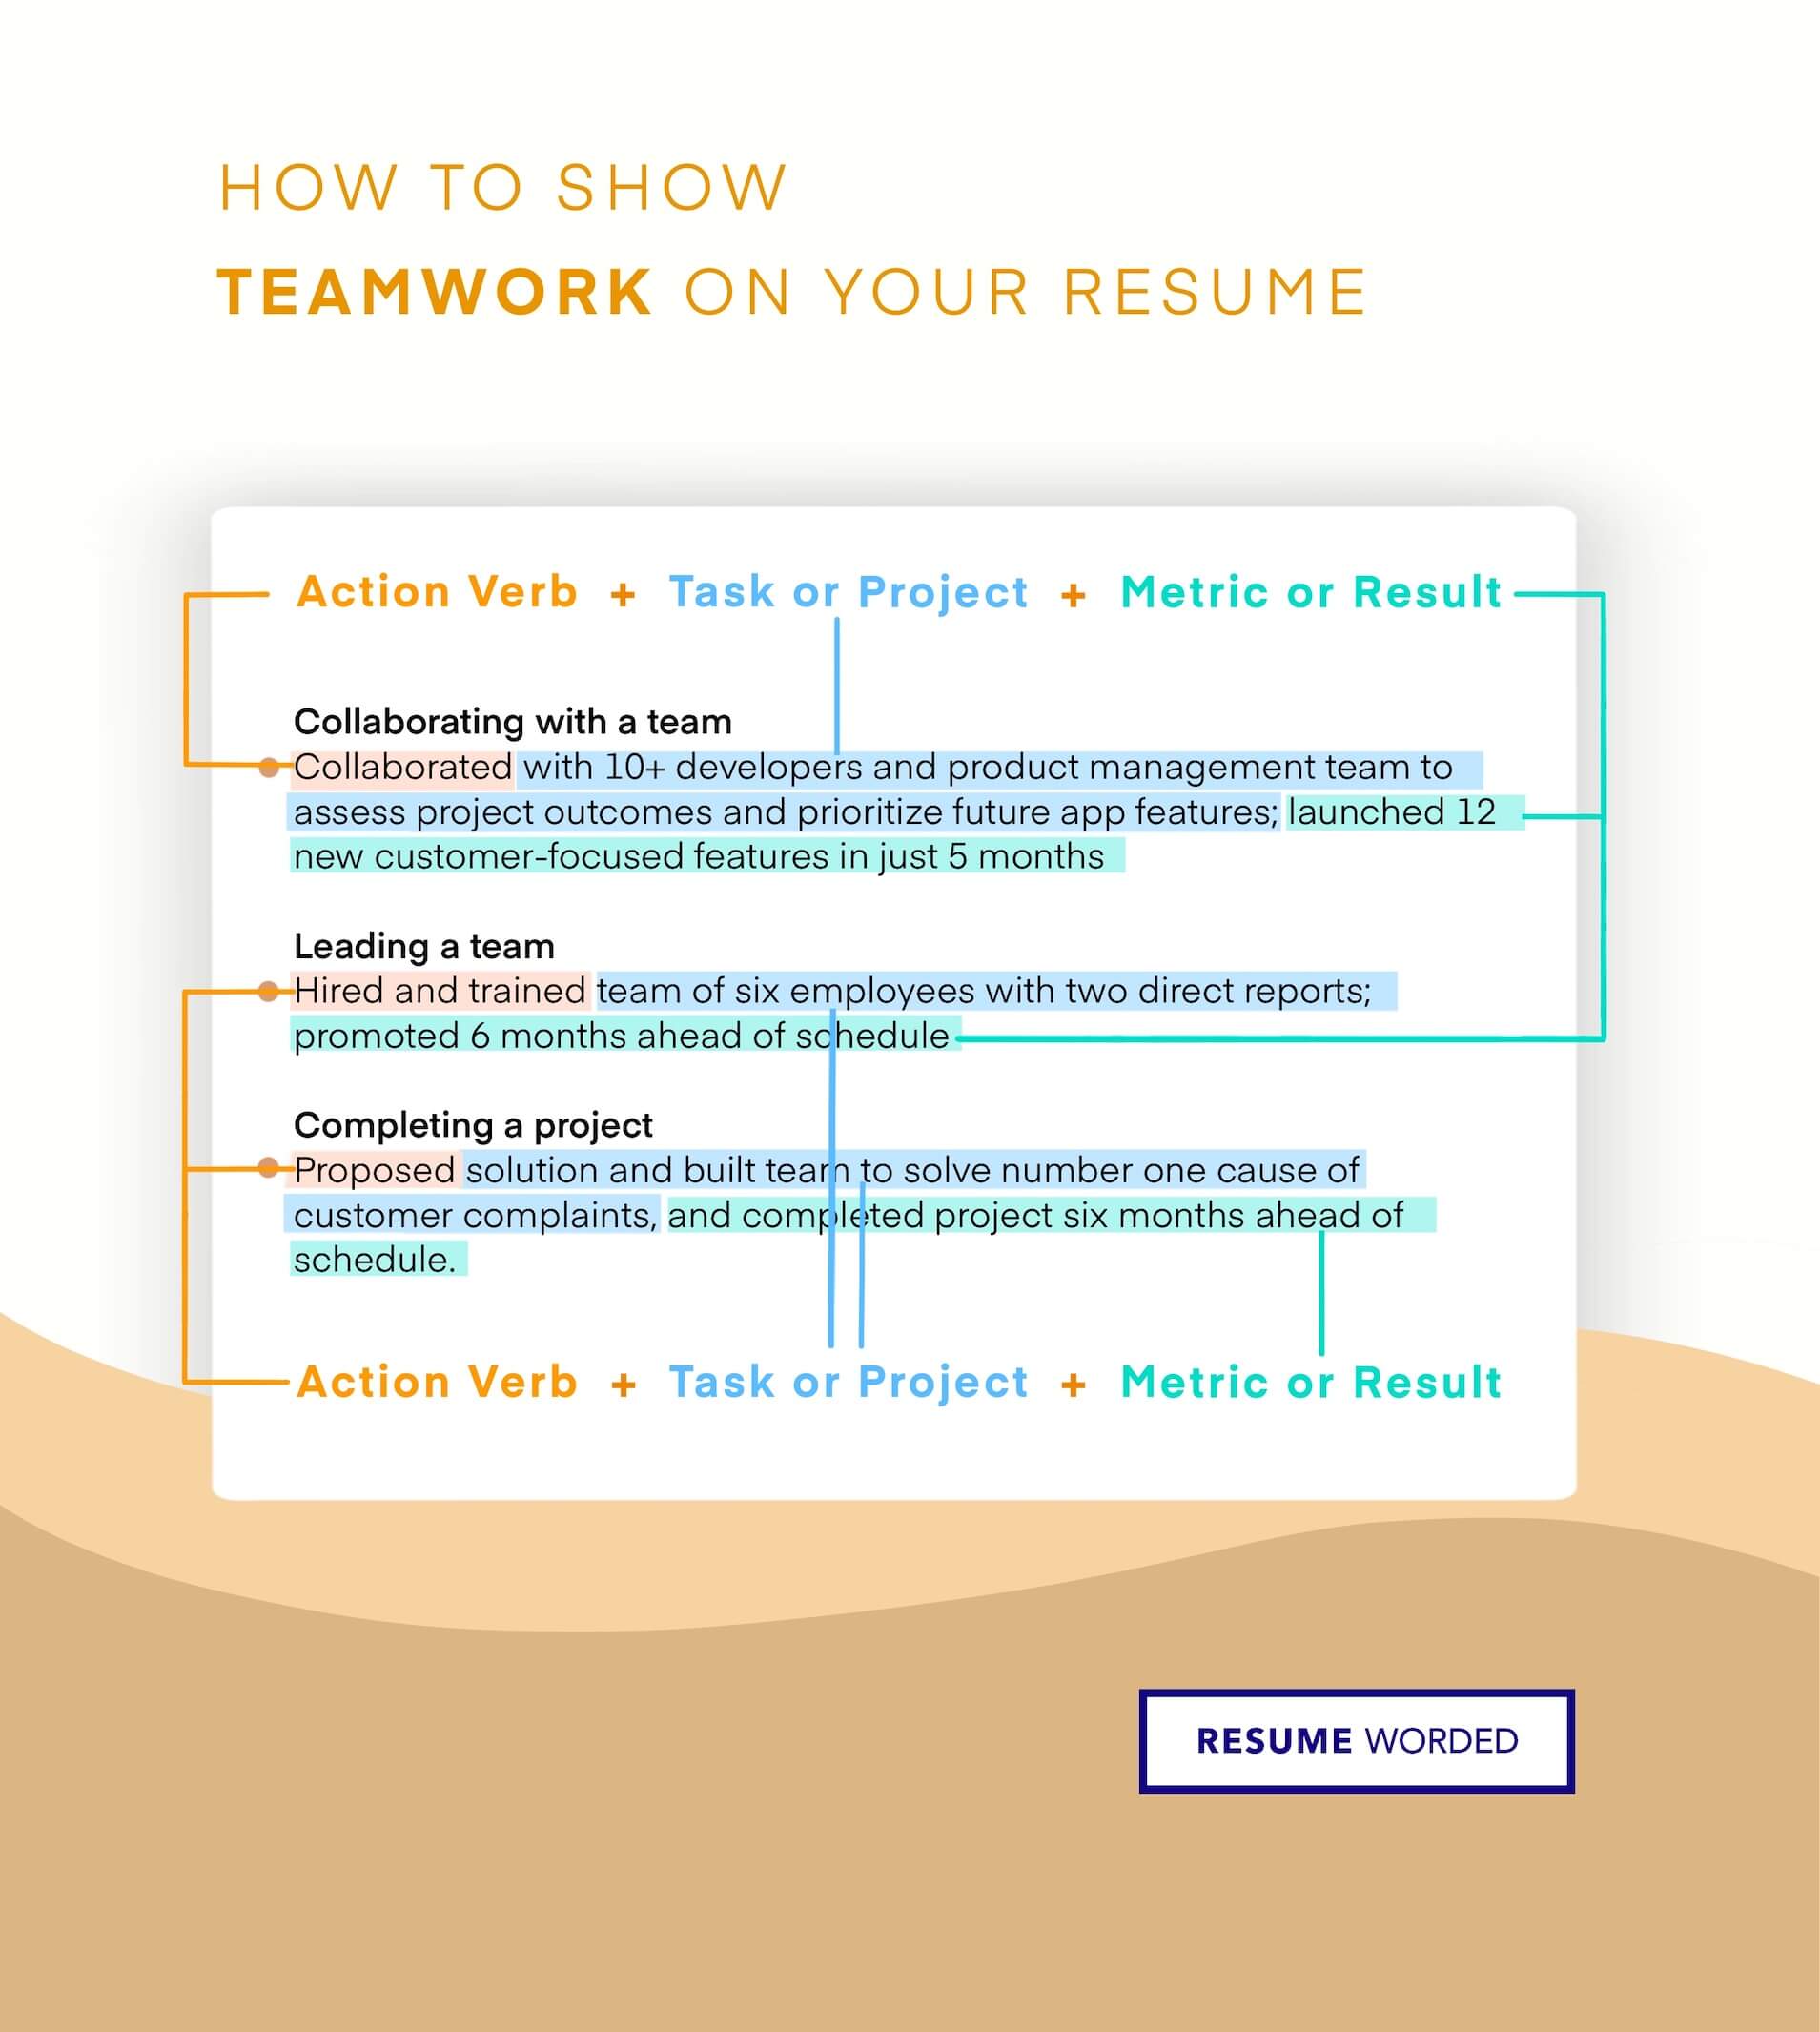 Demonstrate your ability to manage the sales team. - Director of Sales Resume